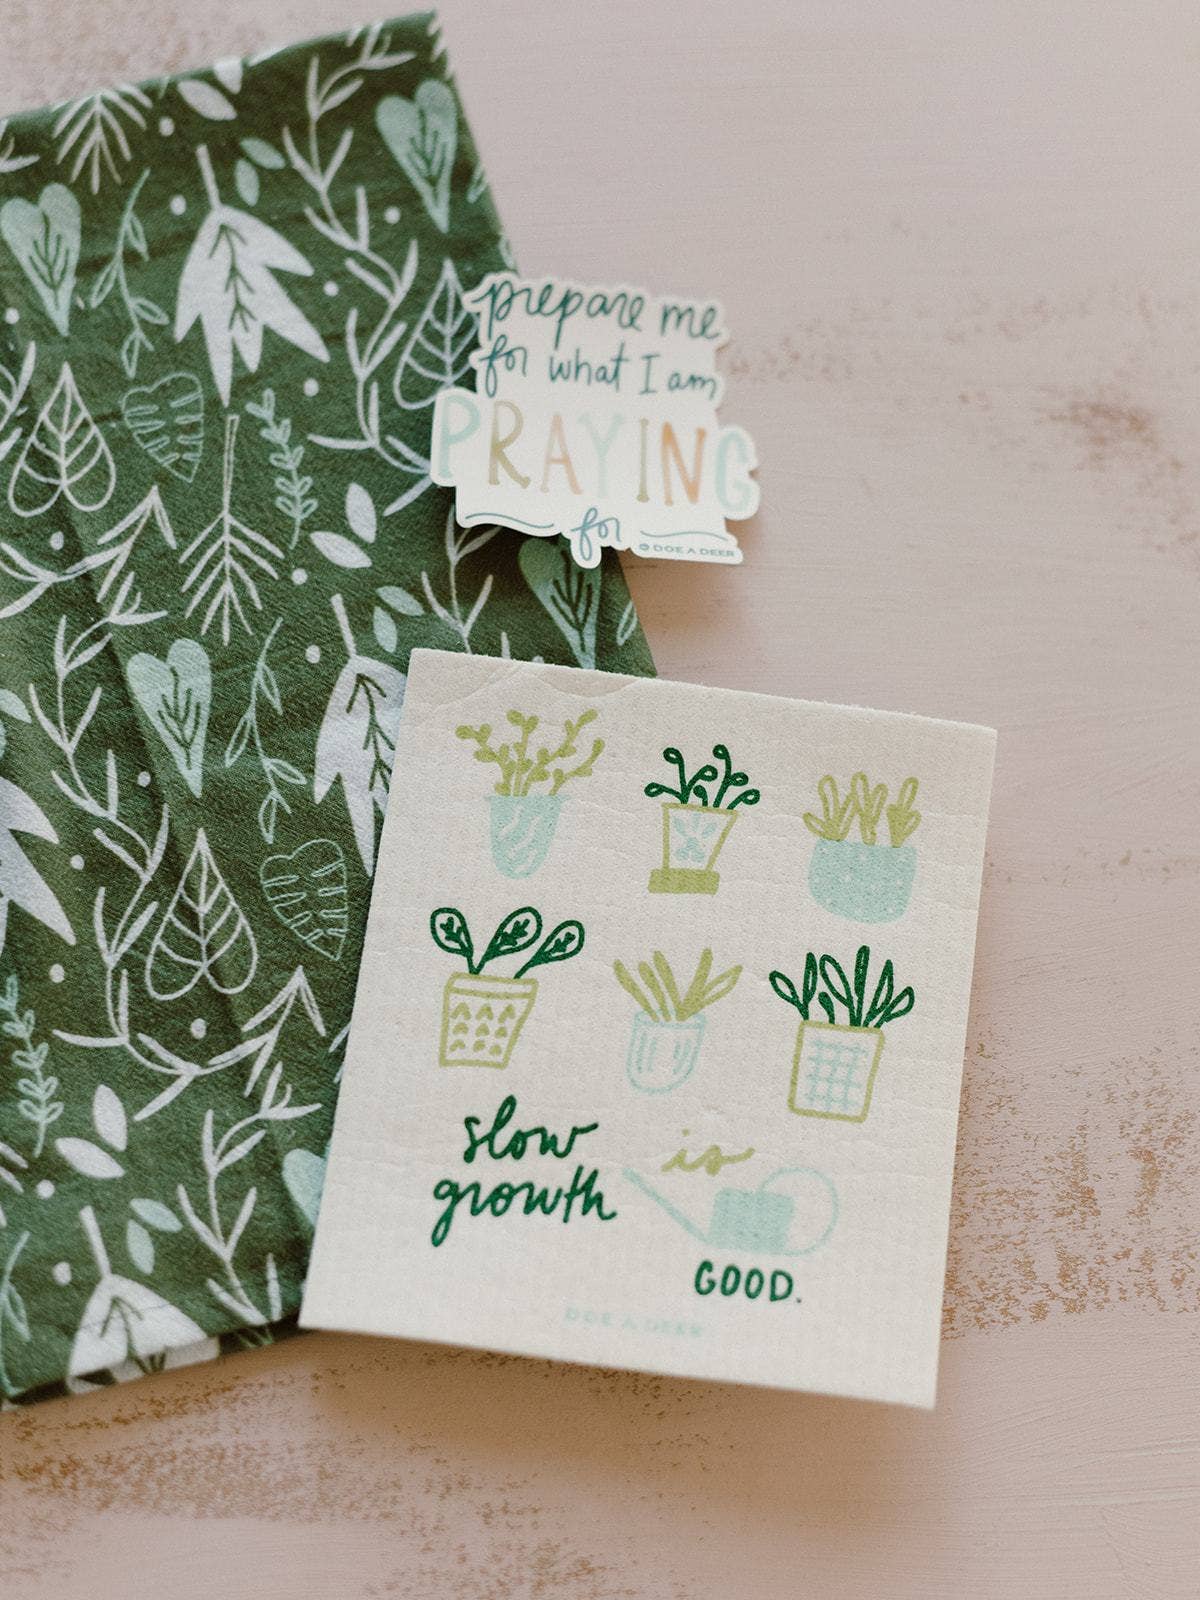 Shop our selection of pretty plant-lover prints on practical household items. Each item sold separately and just pictured for inspiration.